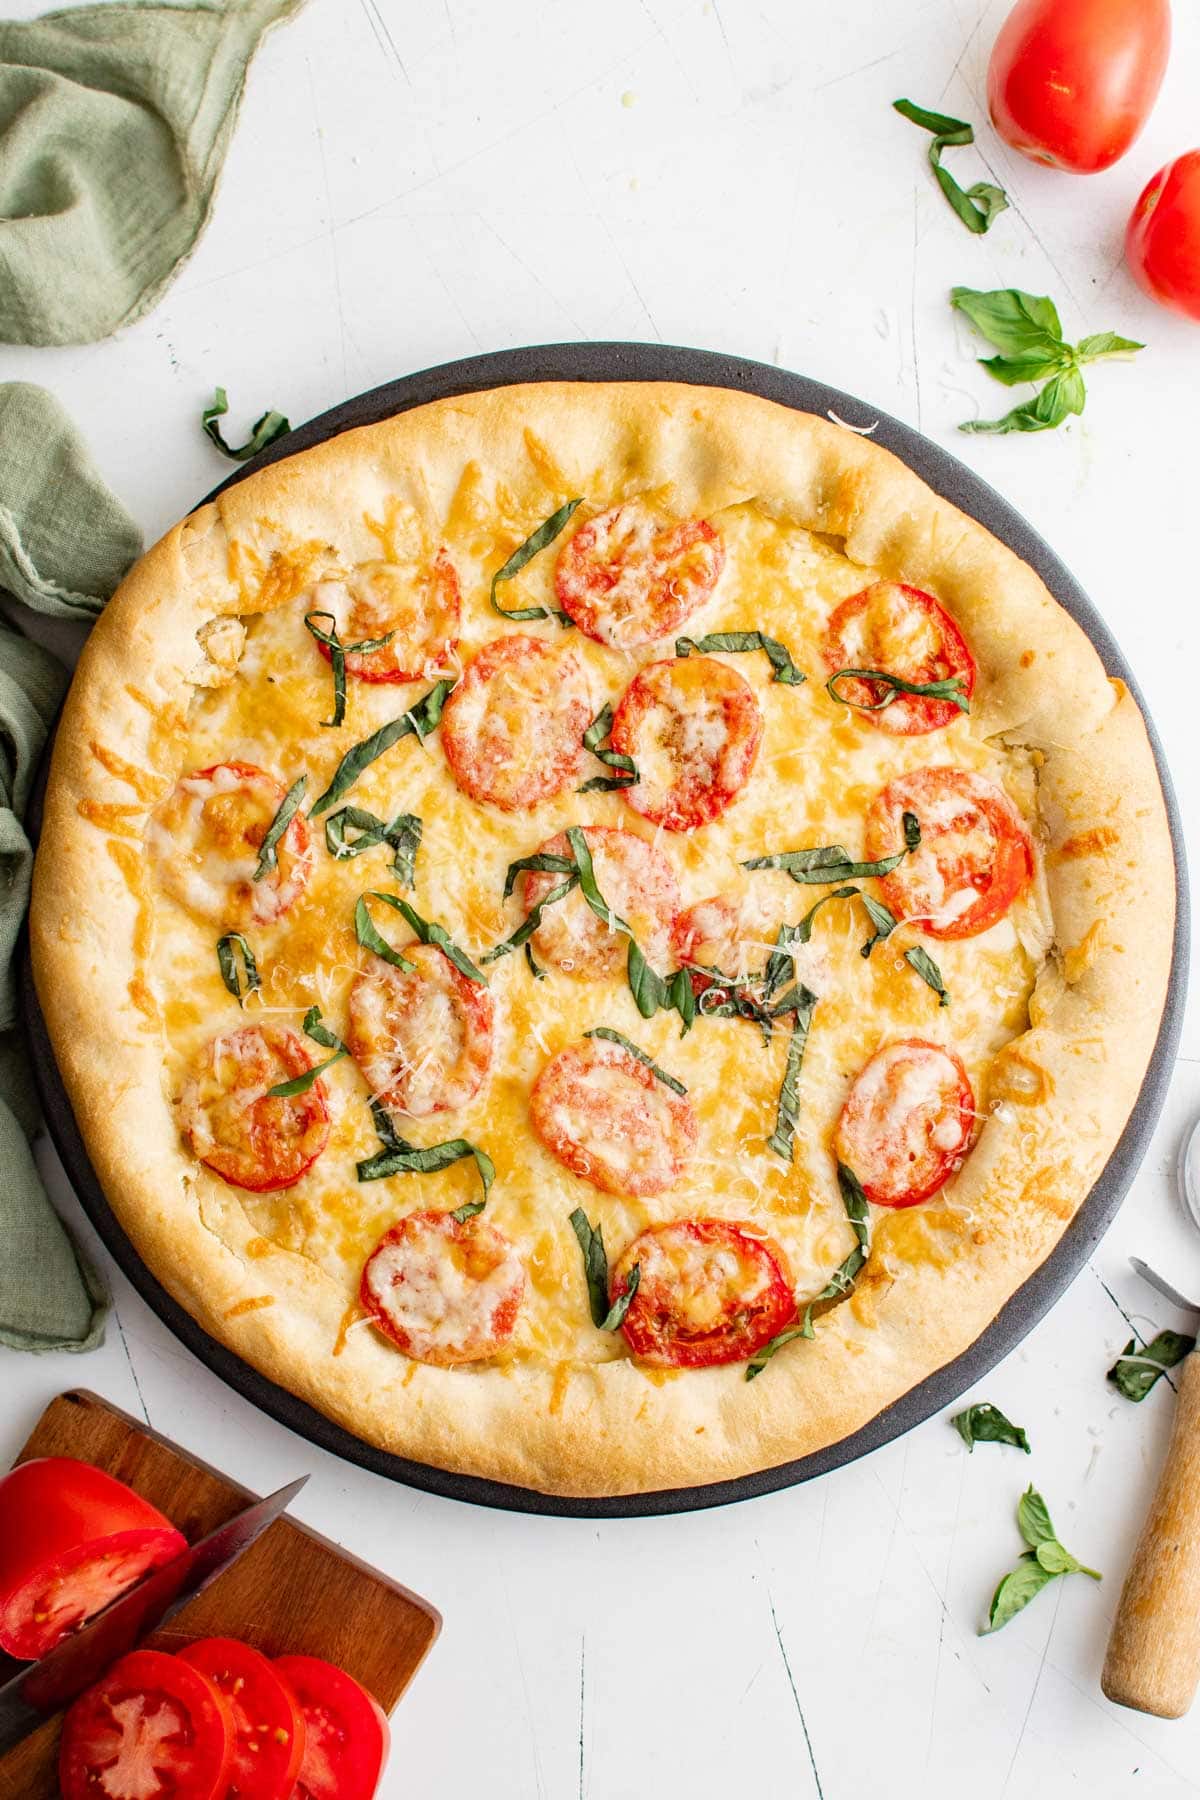 Cheese and Tomato Pizza with basil.